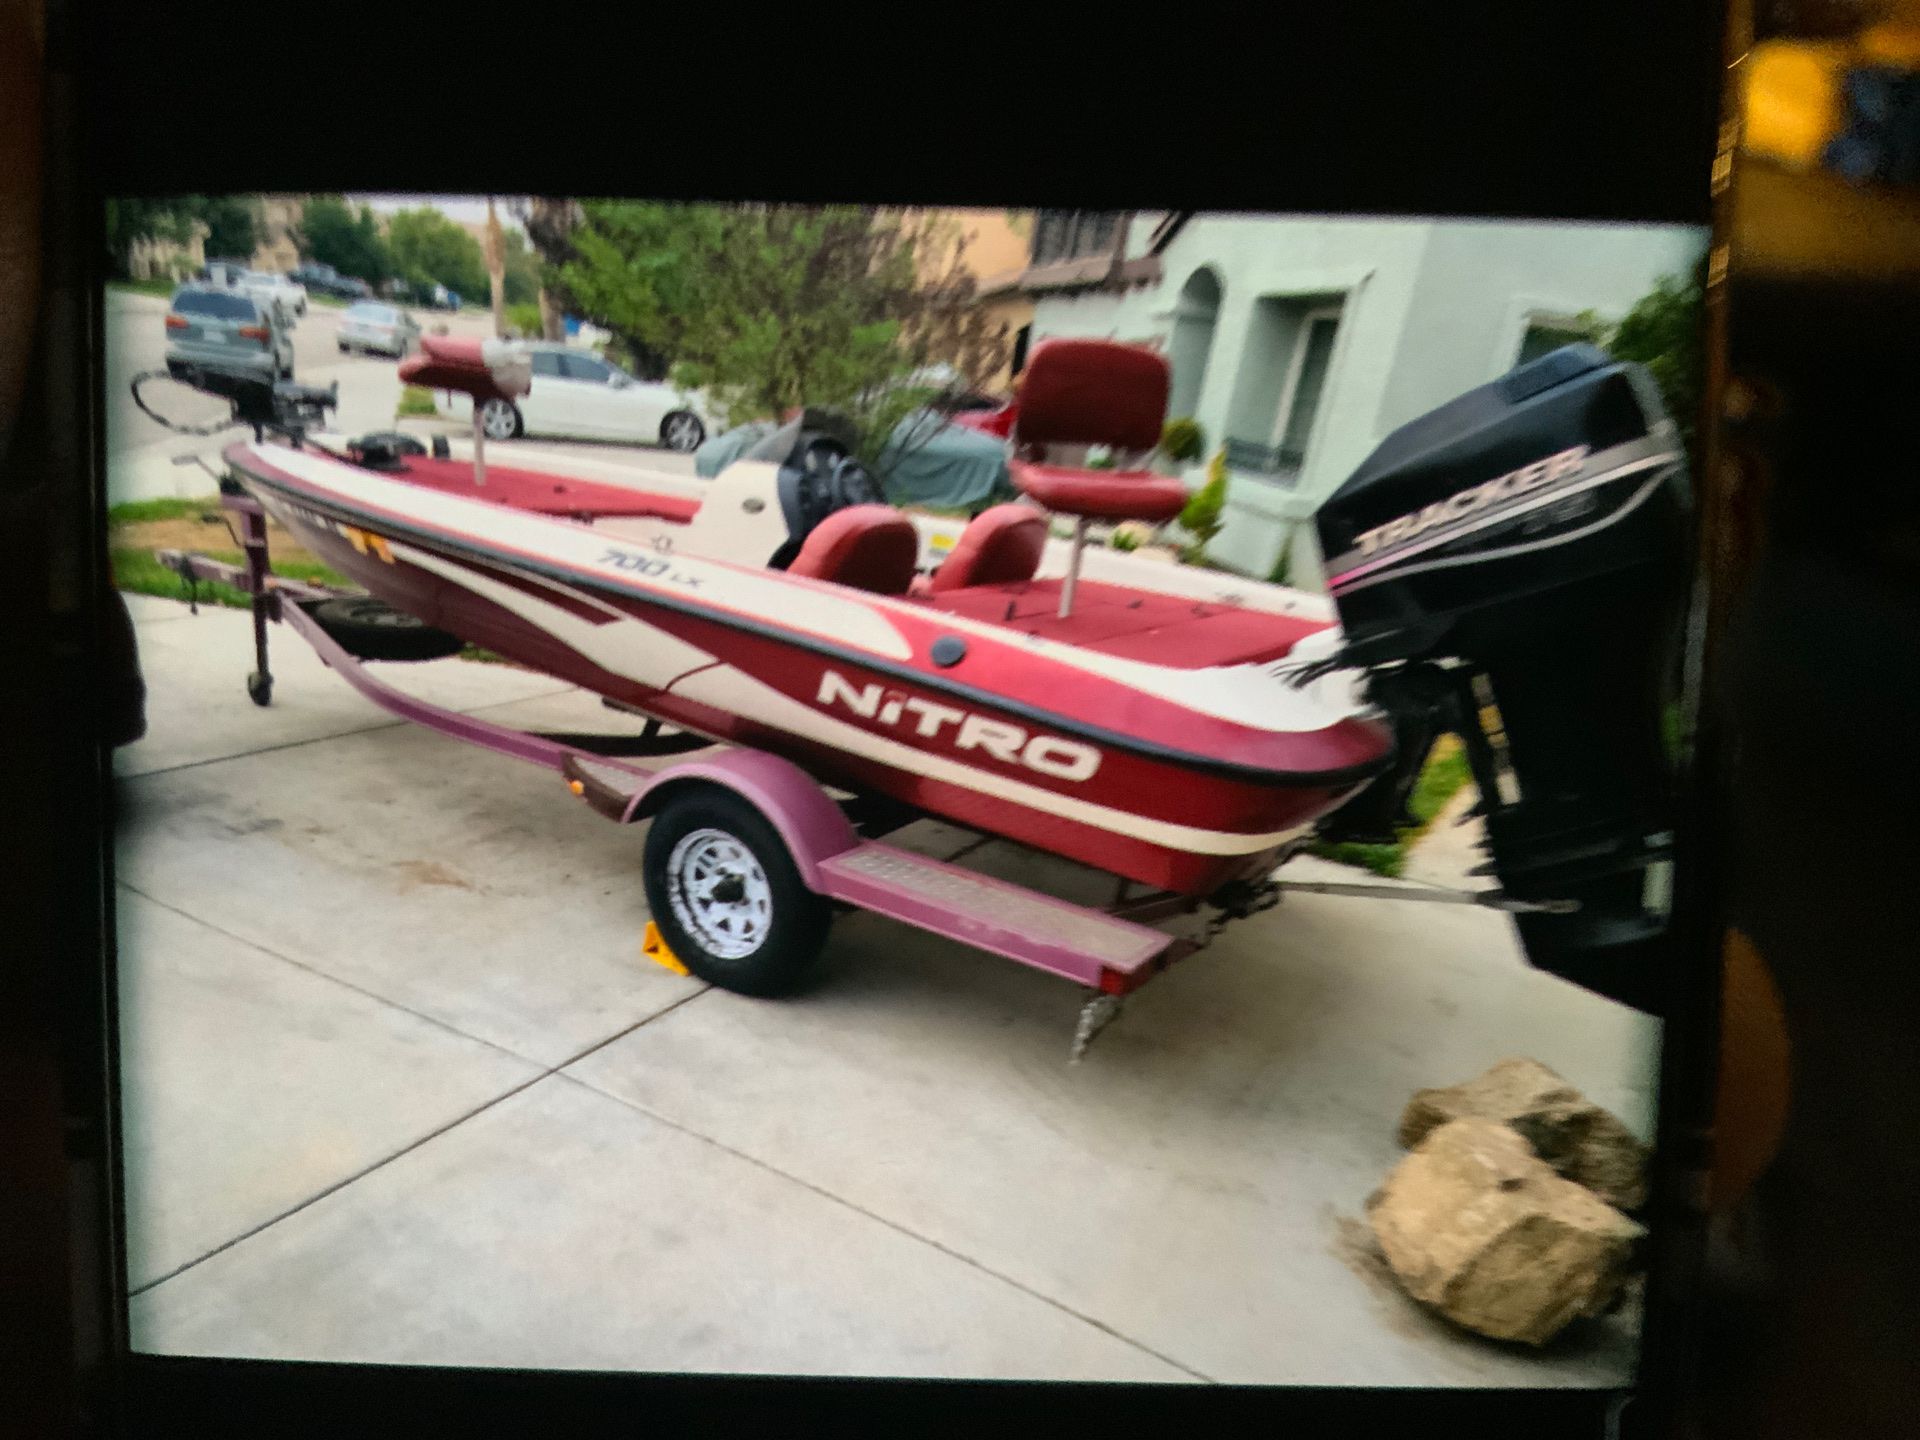 Bass Boat with Nitro trailer